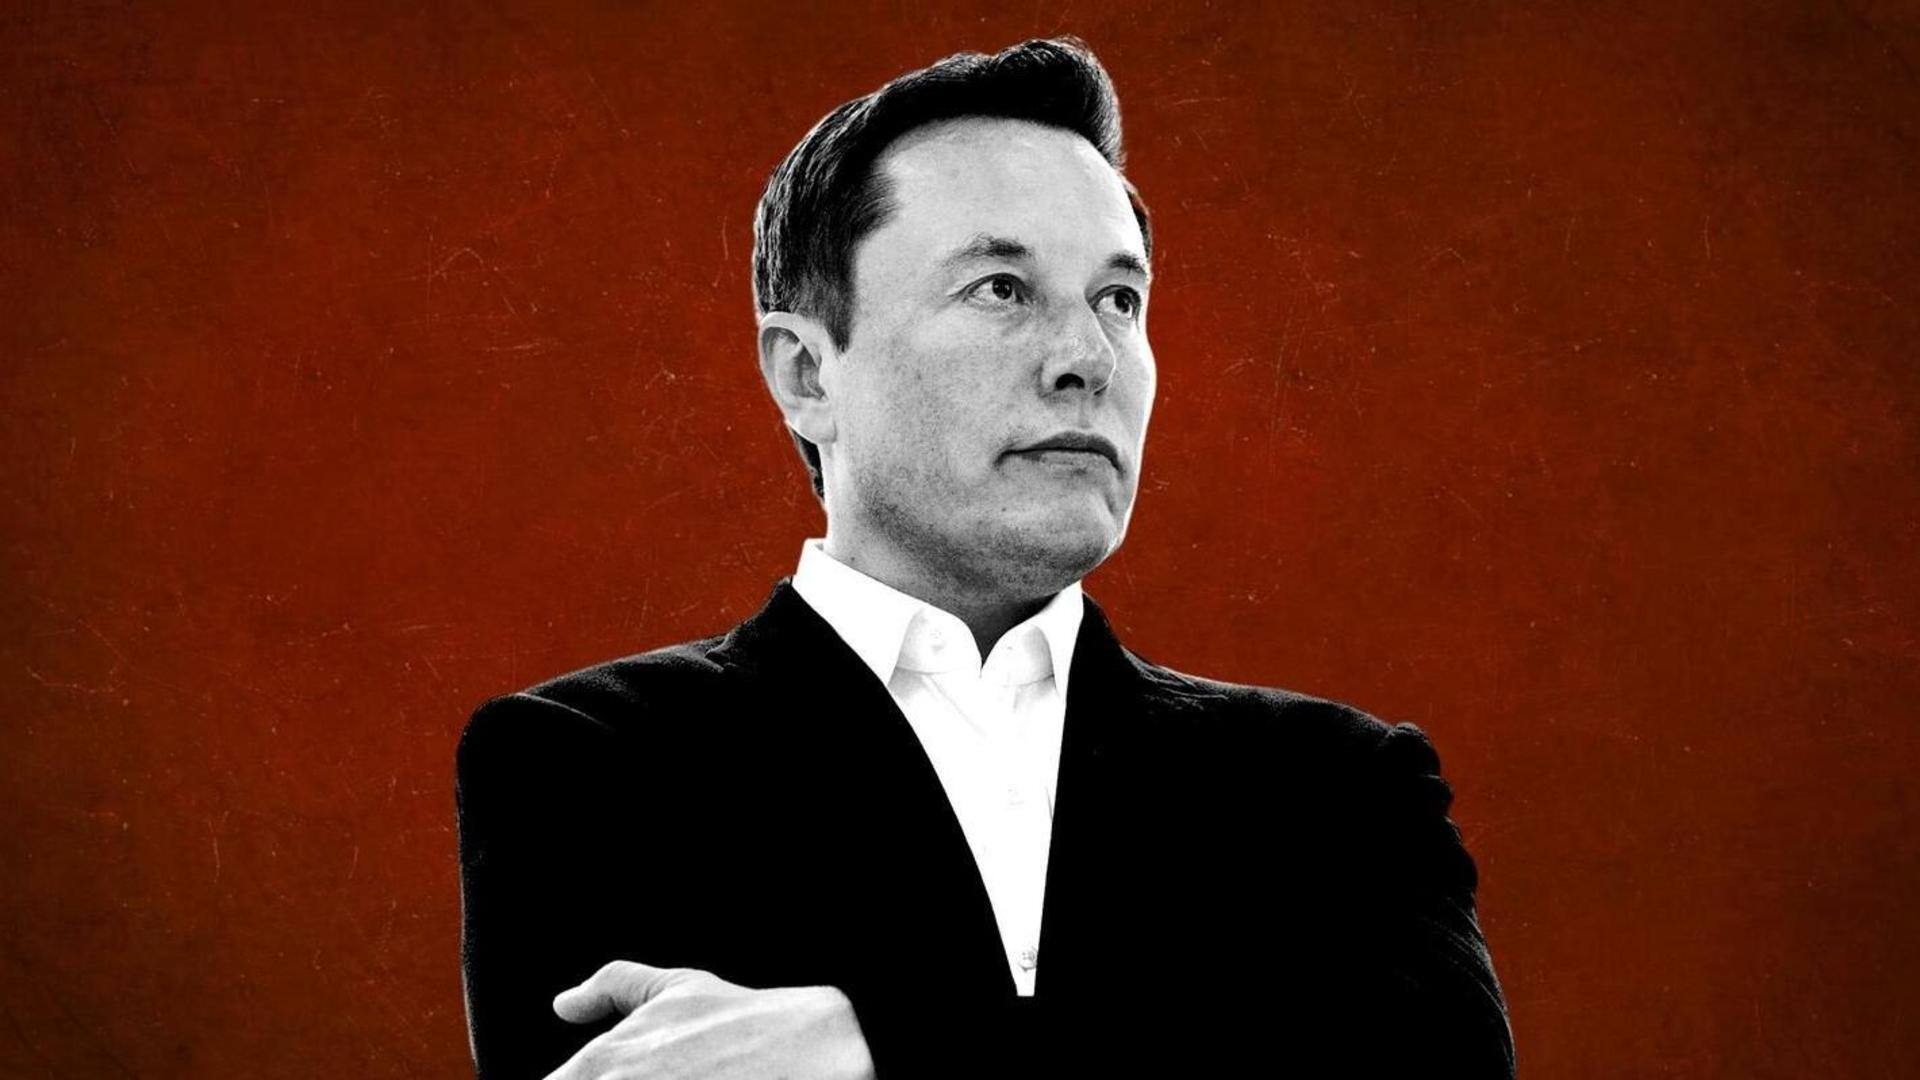 Here's what Elon Musk thinks about AI, blue tick, censorship 